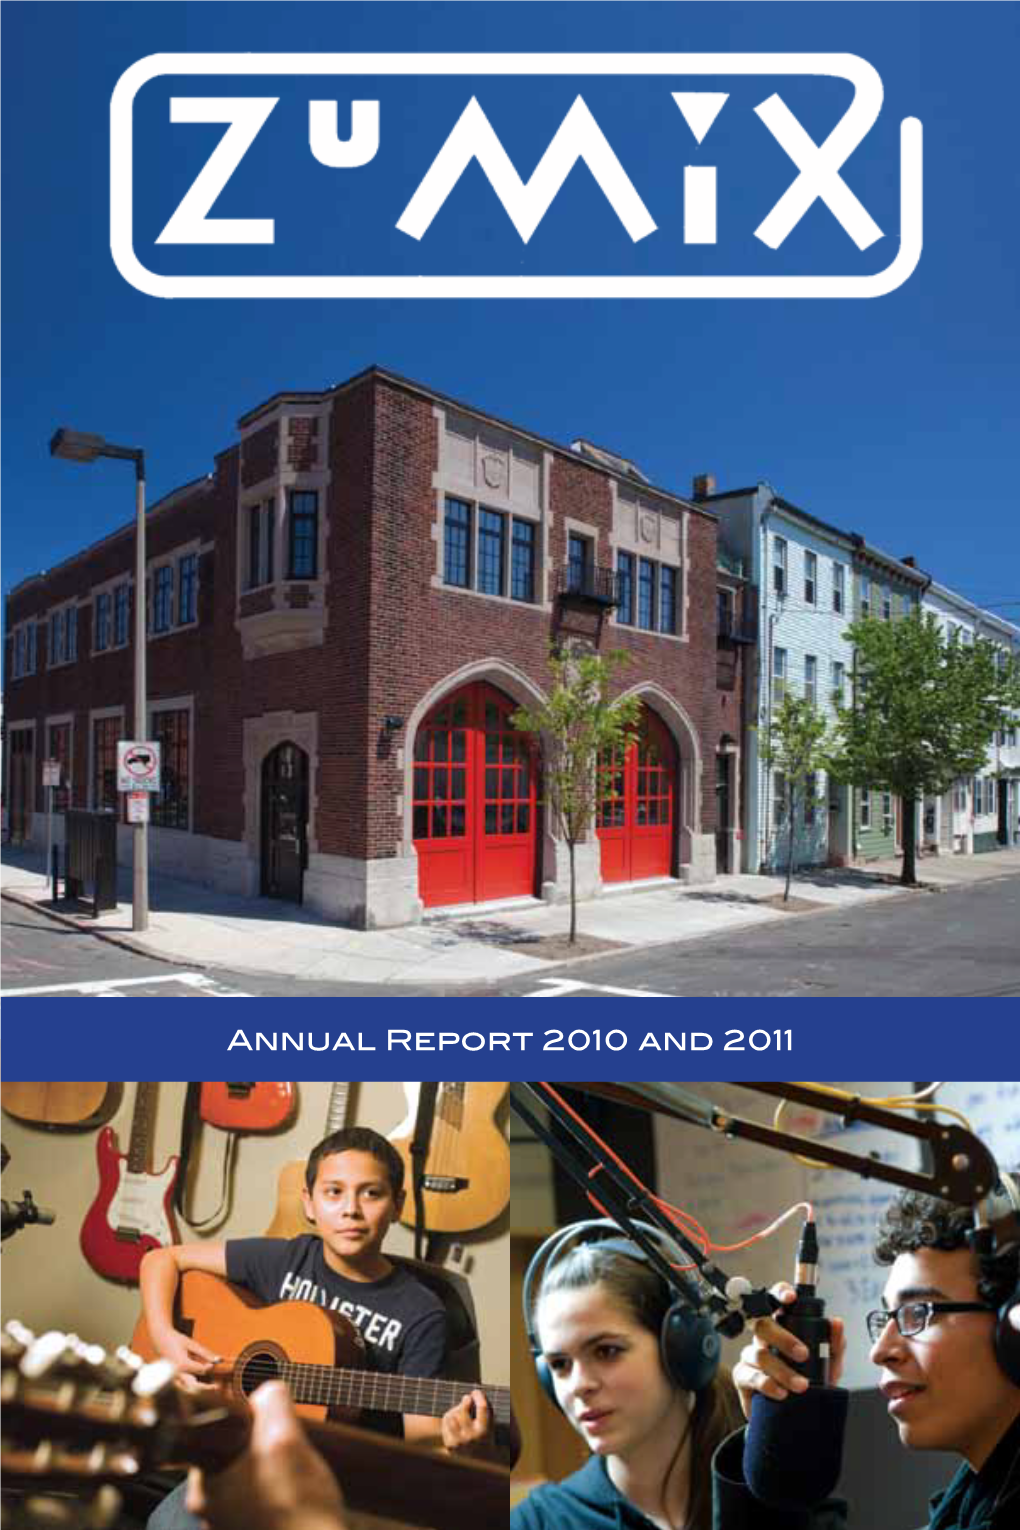 Annual Report 2010 and 2011 Dear Friends, As Many of You Know, I Co-Founded ZUMIX in 1991 in a Tiny Studio Apartment in Maverick Square